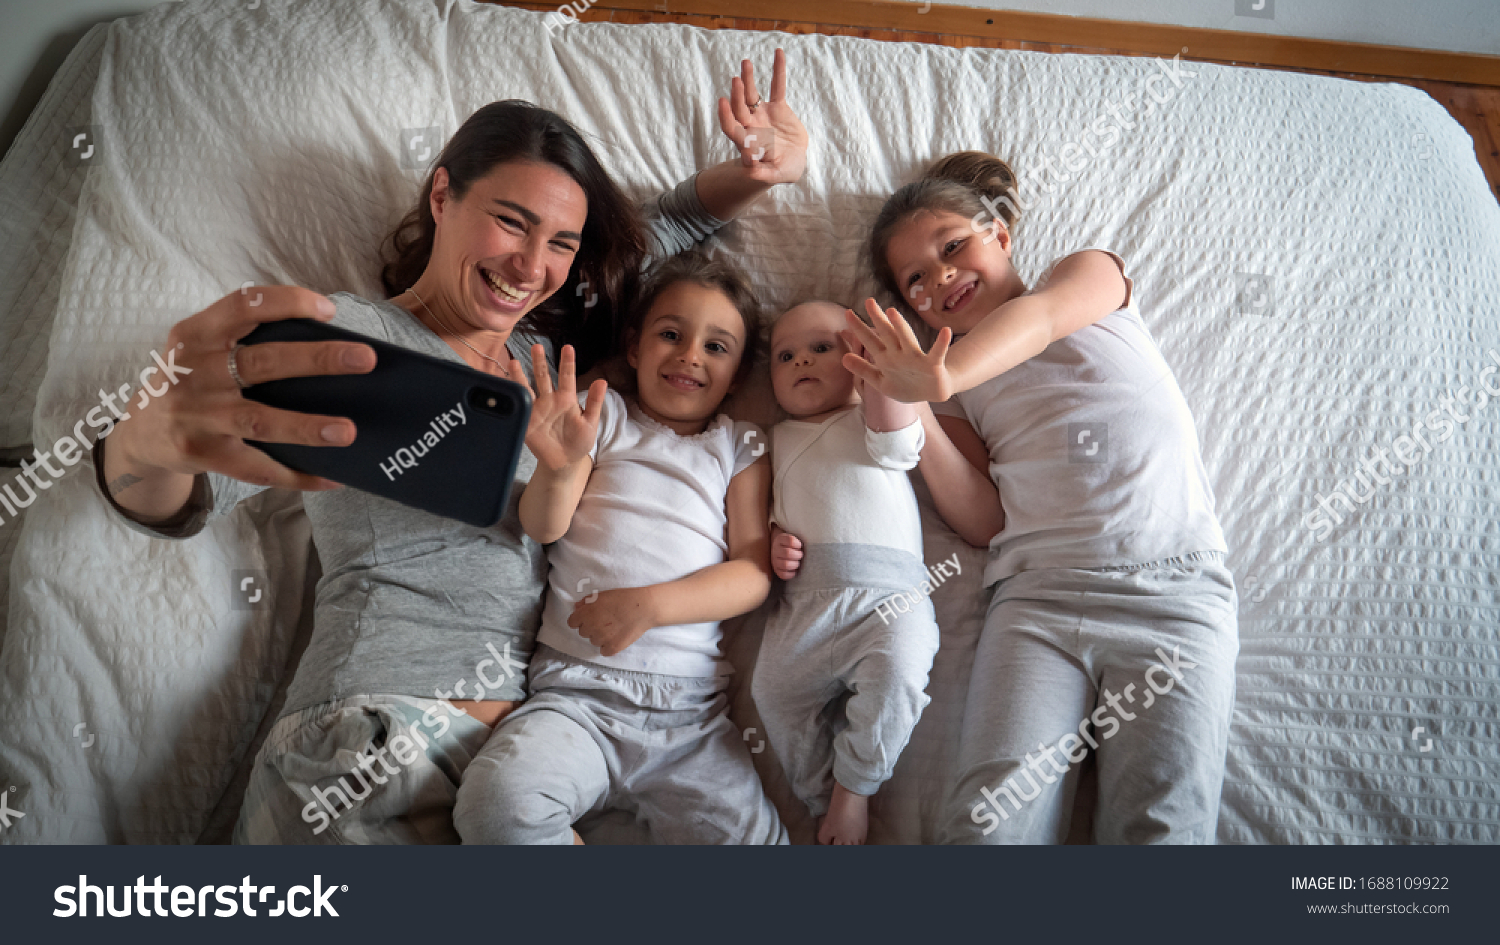 Authentic shot of happy mother with her kids are making a selfie or video call to father or relatives in a bed. Concept of technology, new generation,family, connection, parenthood, authenticity #1688109922